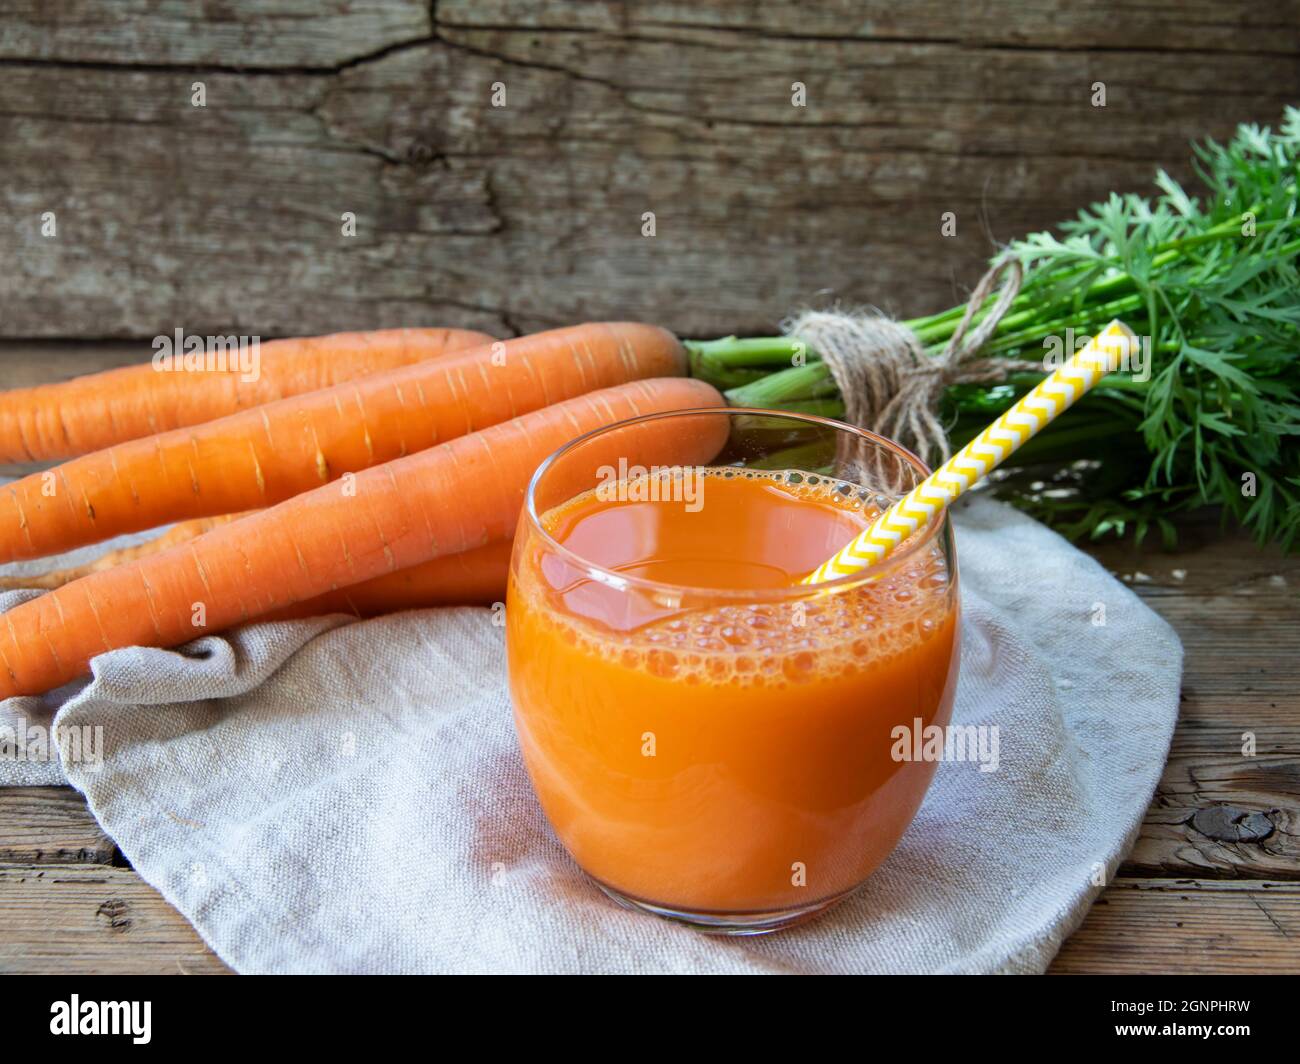 Fresh squeezed carrot juice in a glass on a wooden surface, rustic style  Healthy eating, detox, dieting and vegetarian concept. Stock Photo